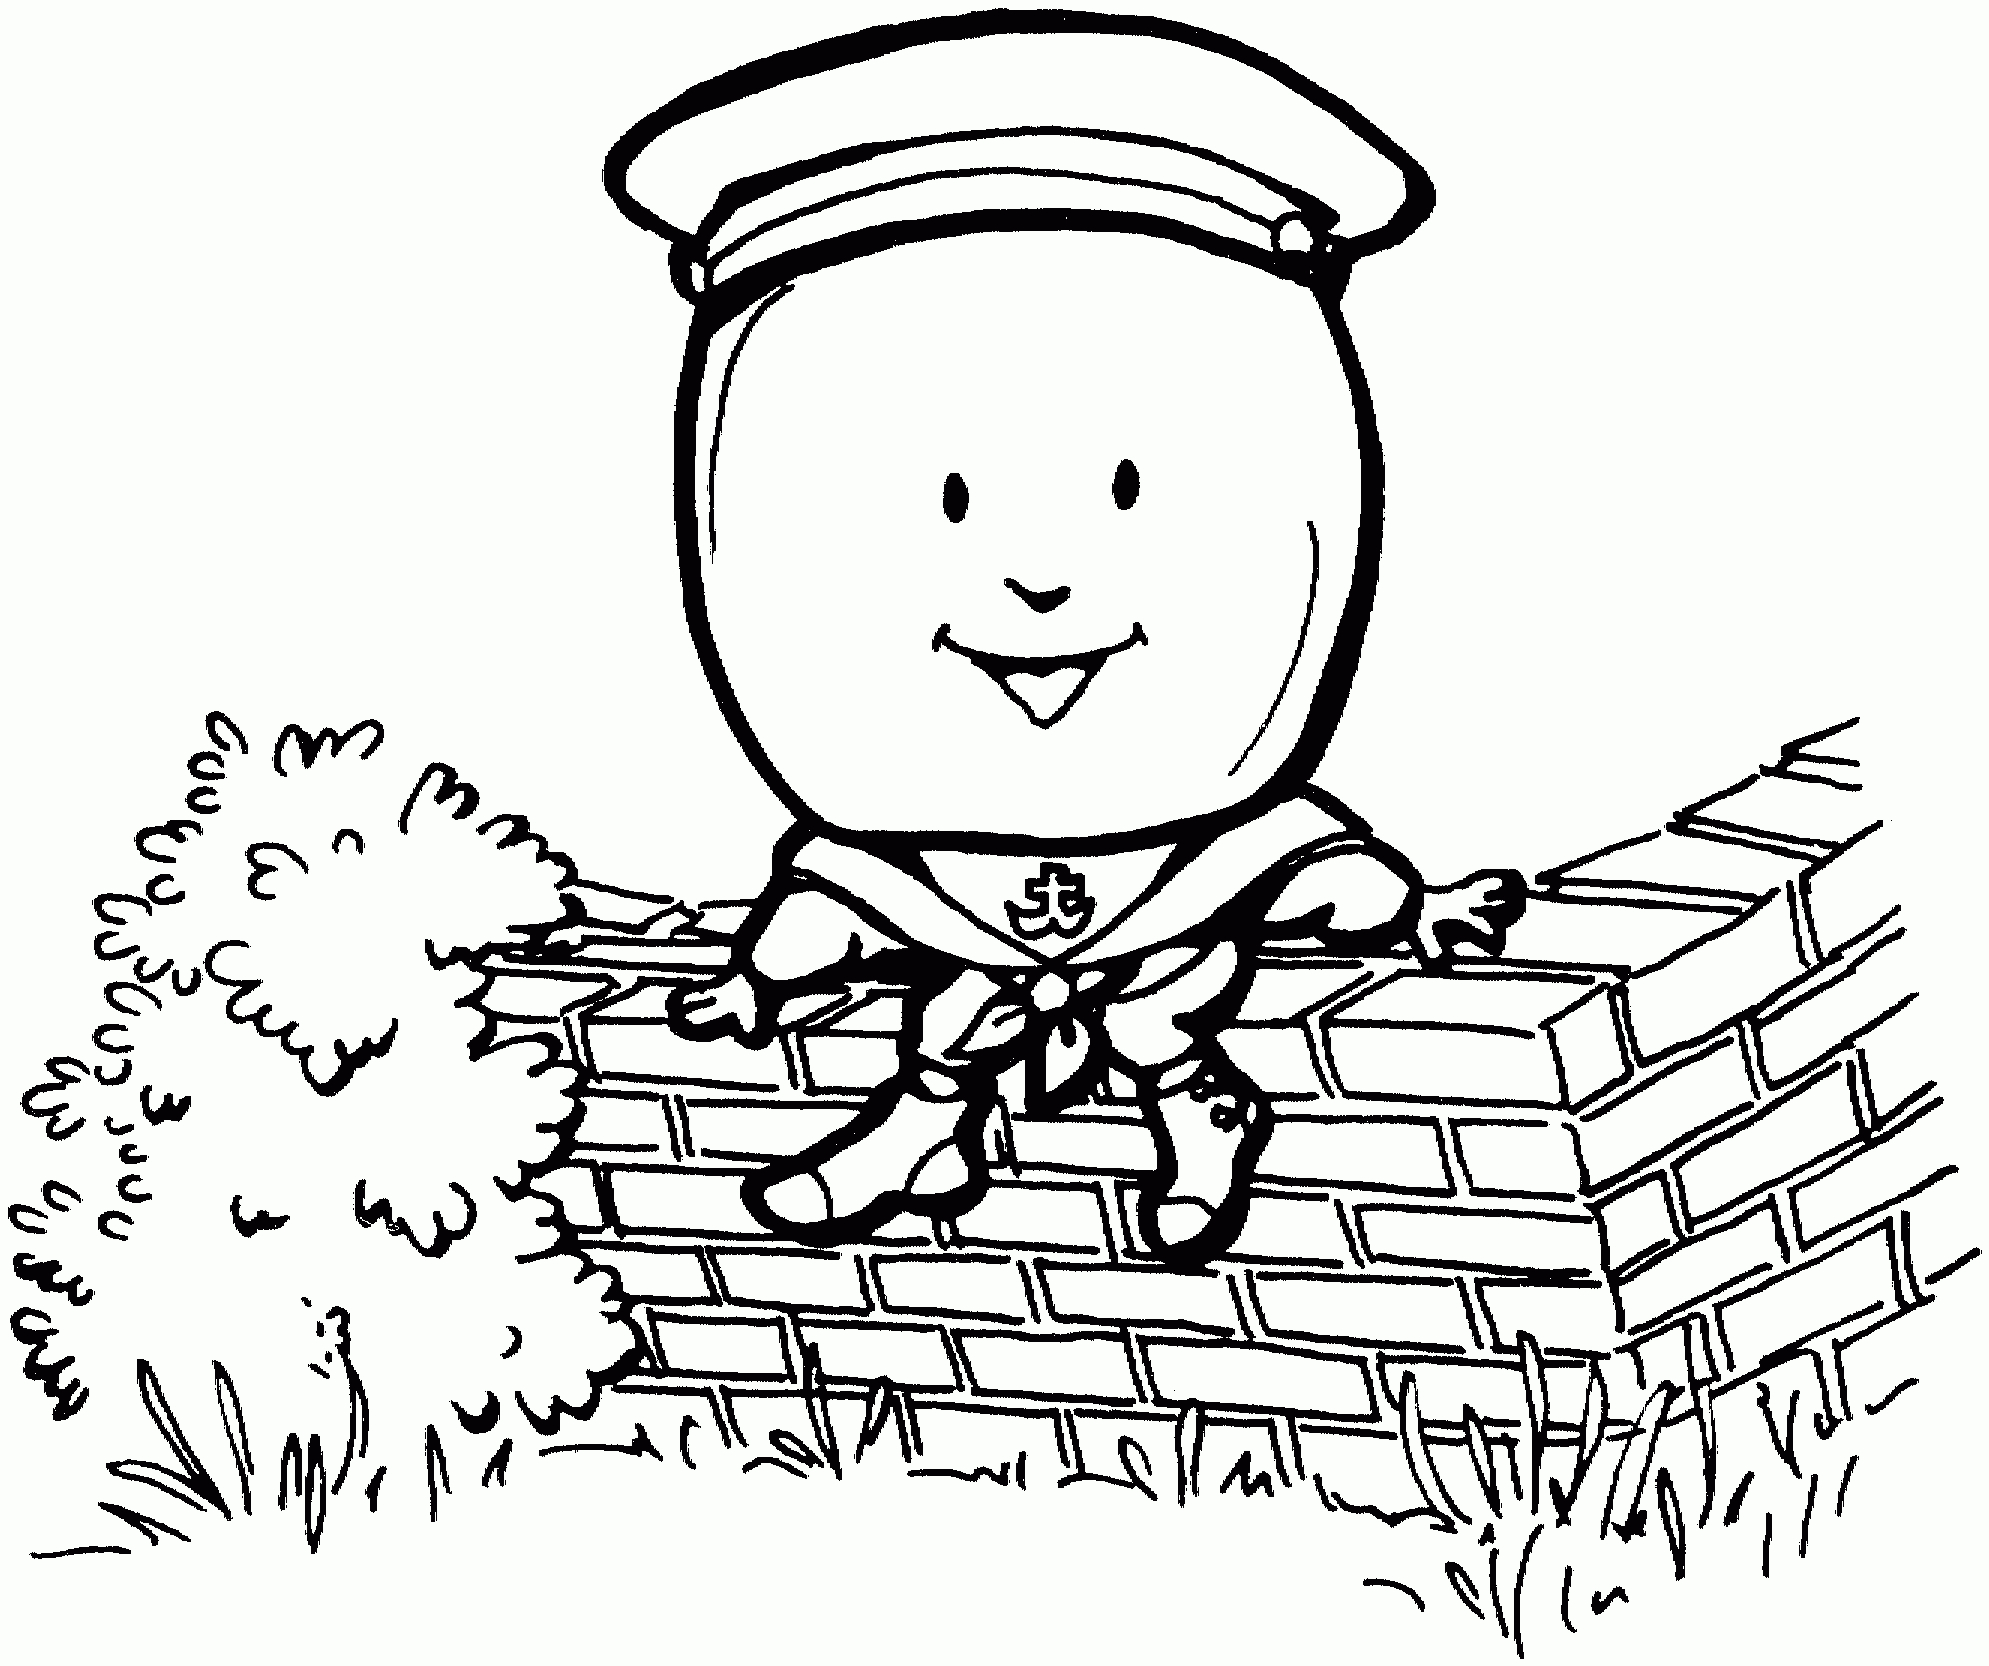 Humpty Dumpty Coloring Pages To Download And Print For Free - Free Printable Mother Goose Nursery Rhymes